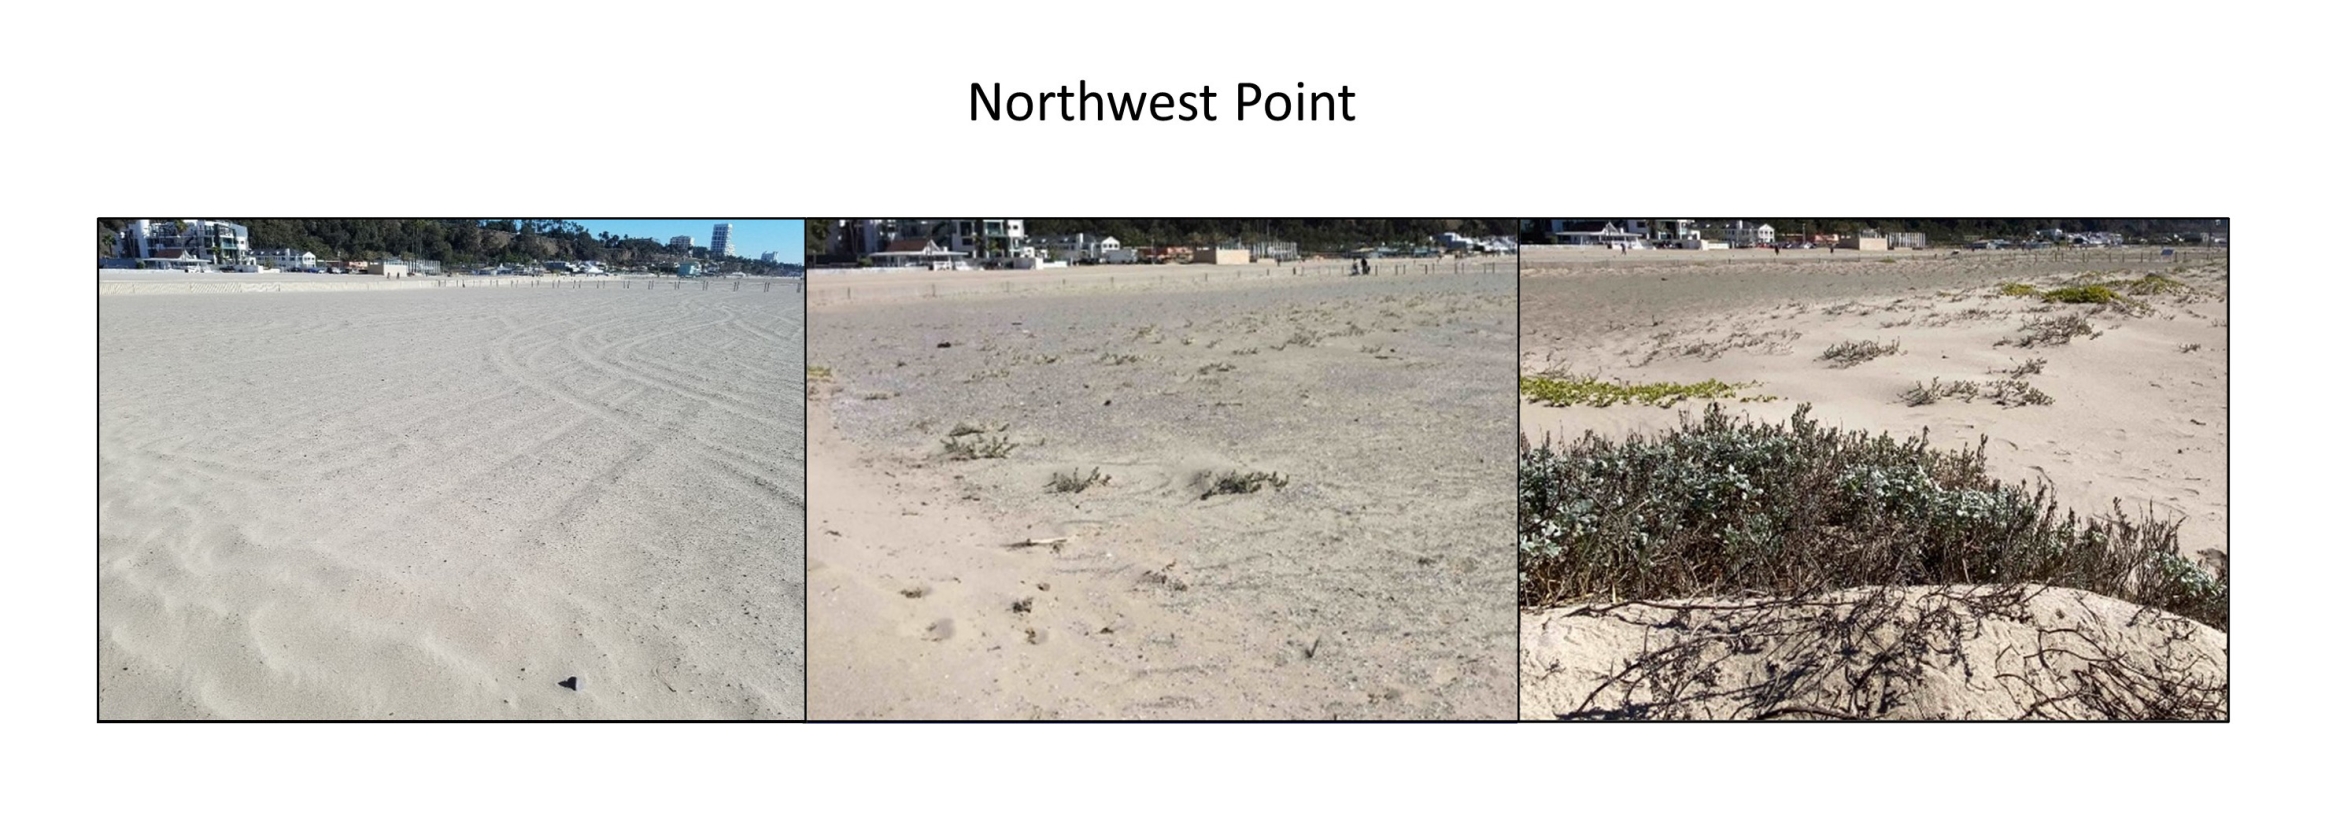 three photos showing the change in the landscape of a section of beach